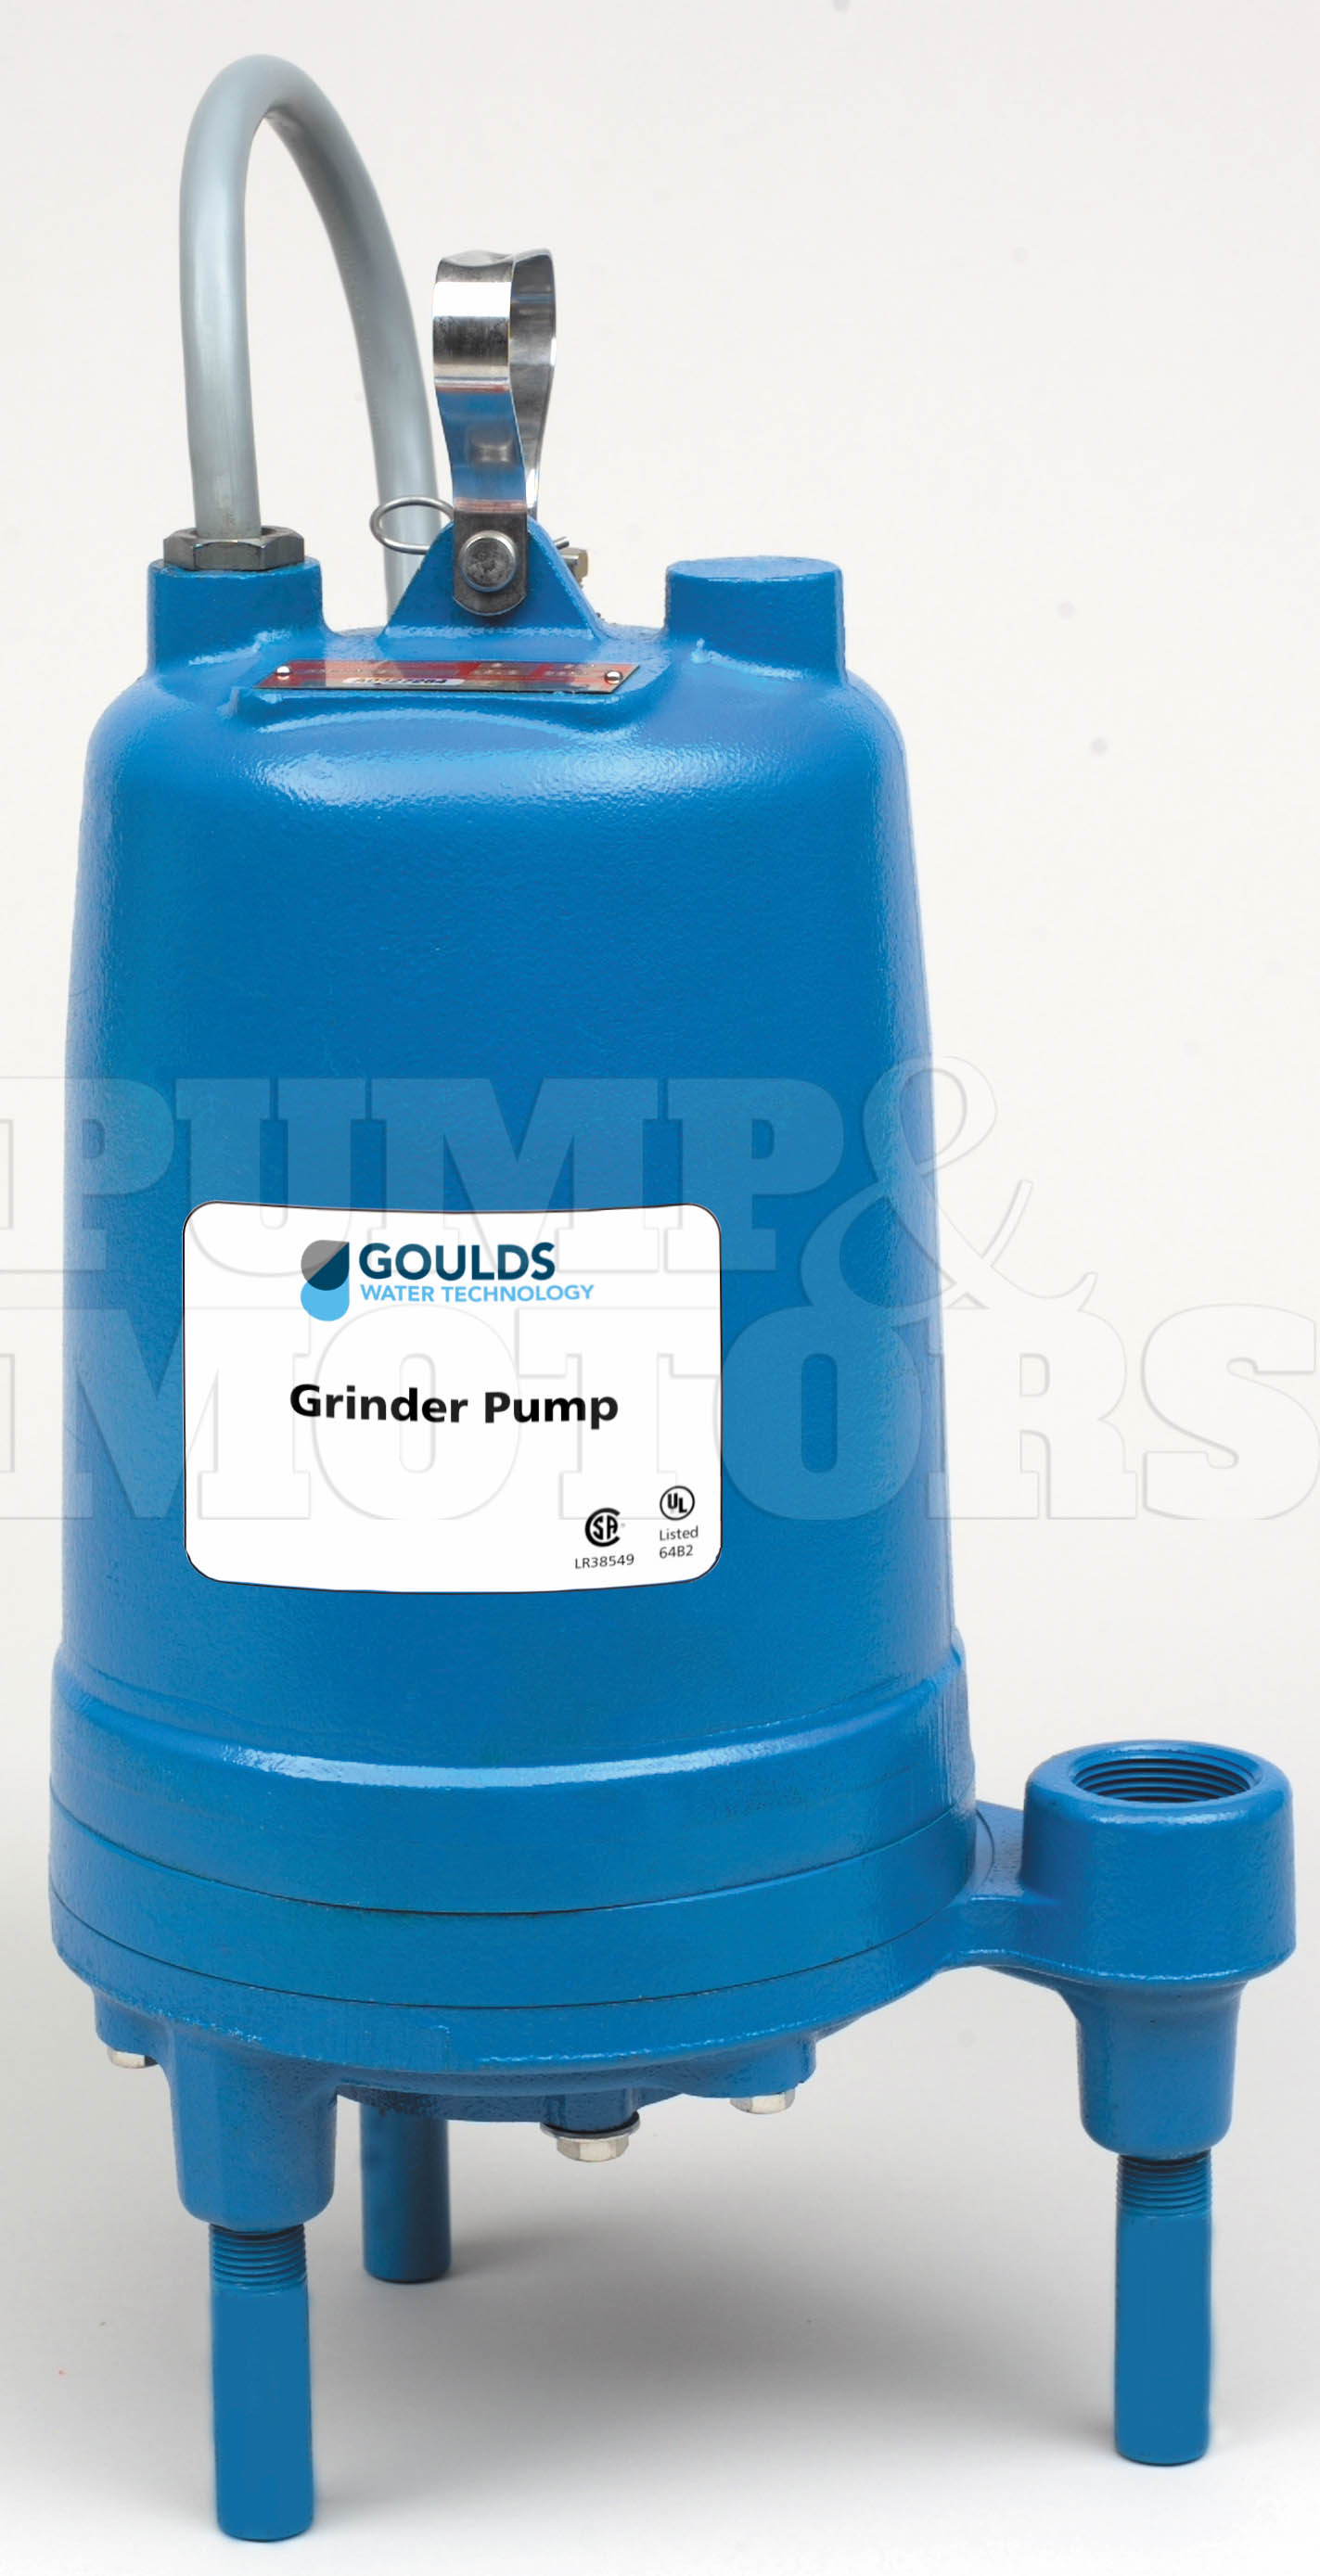 Goulds RGS2012E1E 2HP Submersible Grinder Pump 208/230V 1 Phase